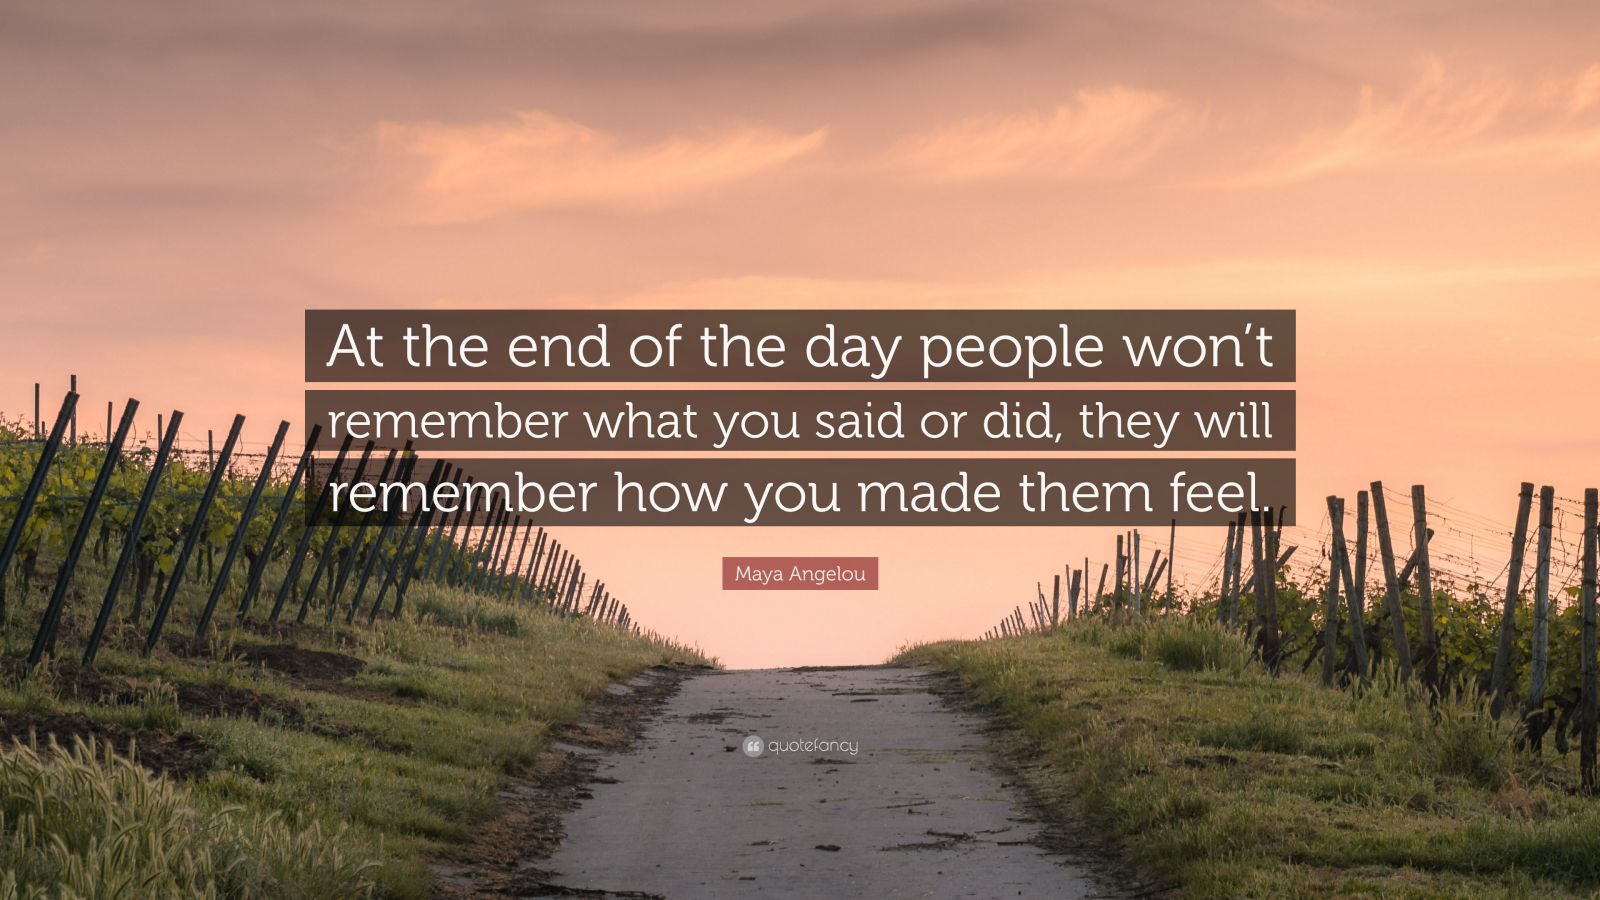 Maya Angelou Quote: “At the end of the day people won’t remember what